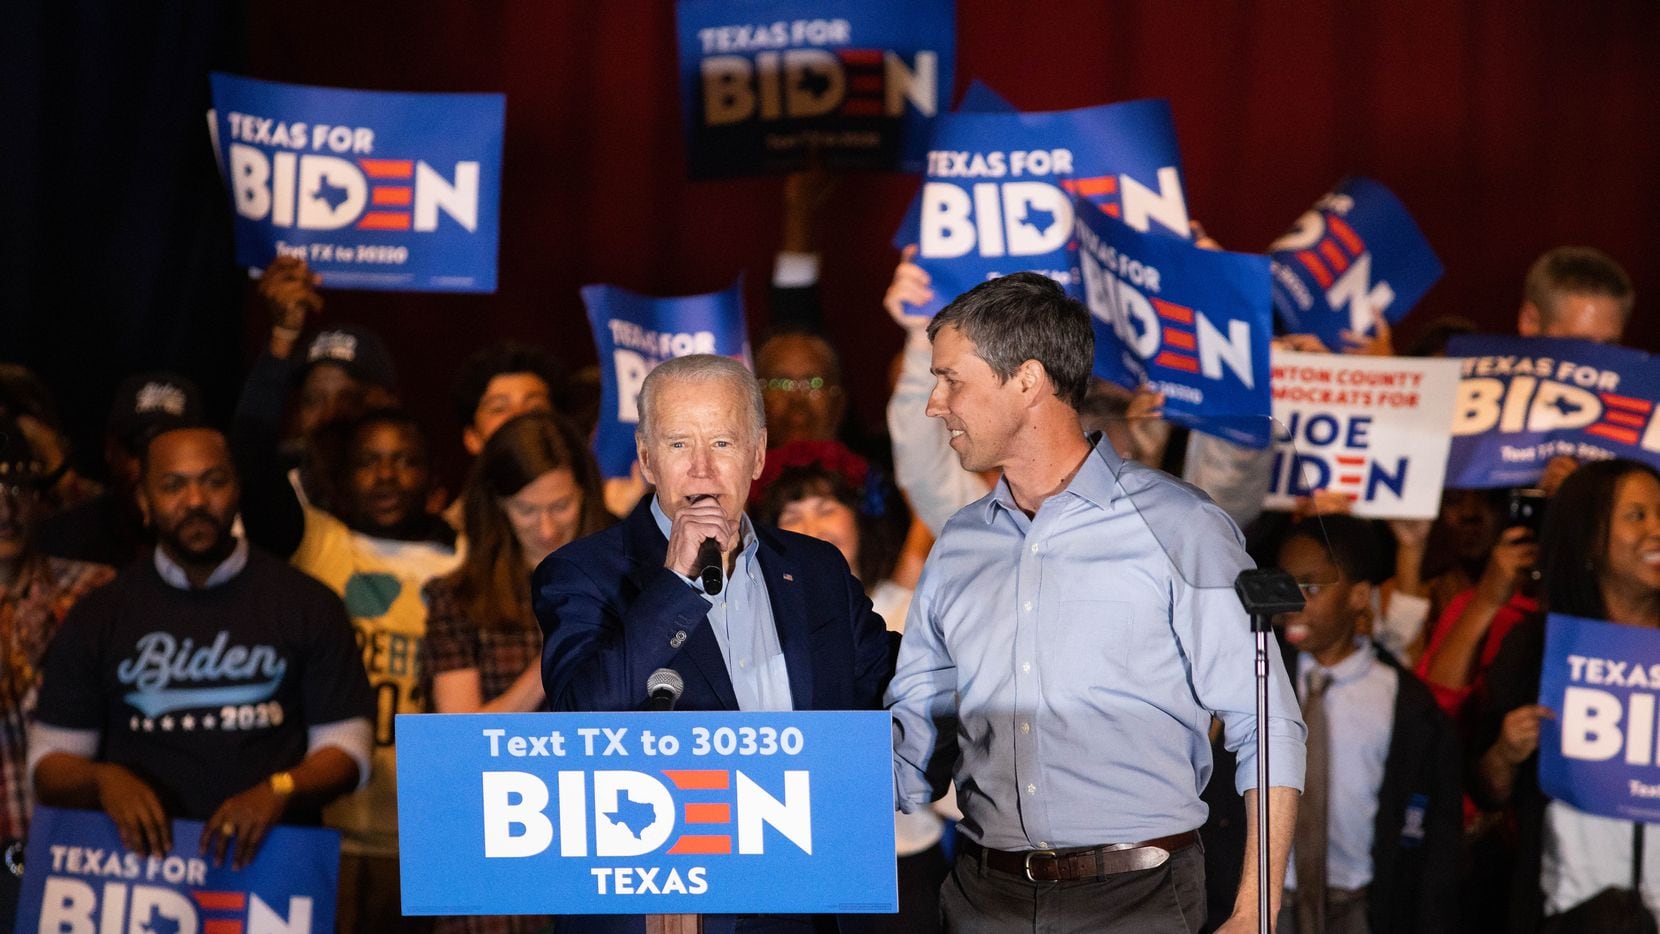 Former Rep. Beto O'Rourke endorses Democratic presidential primary candidate Joe Biden during a rally at Gilley's in Dallas on March 2, 2020.